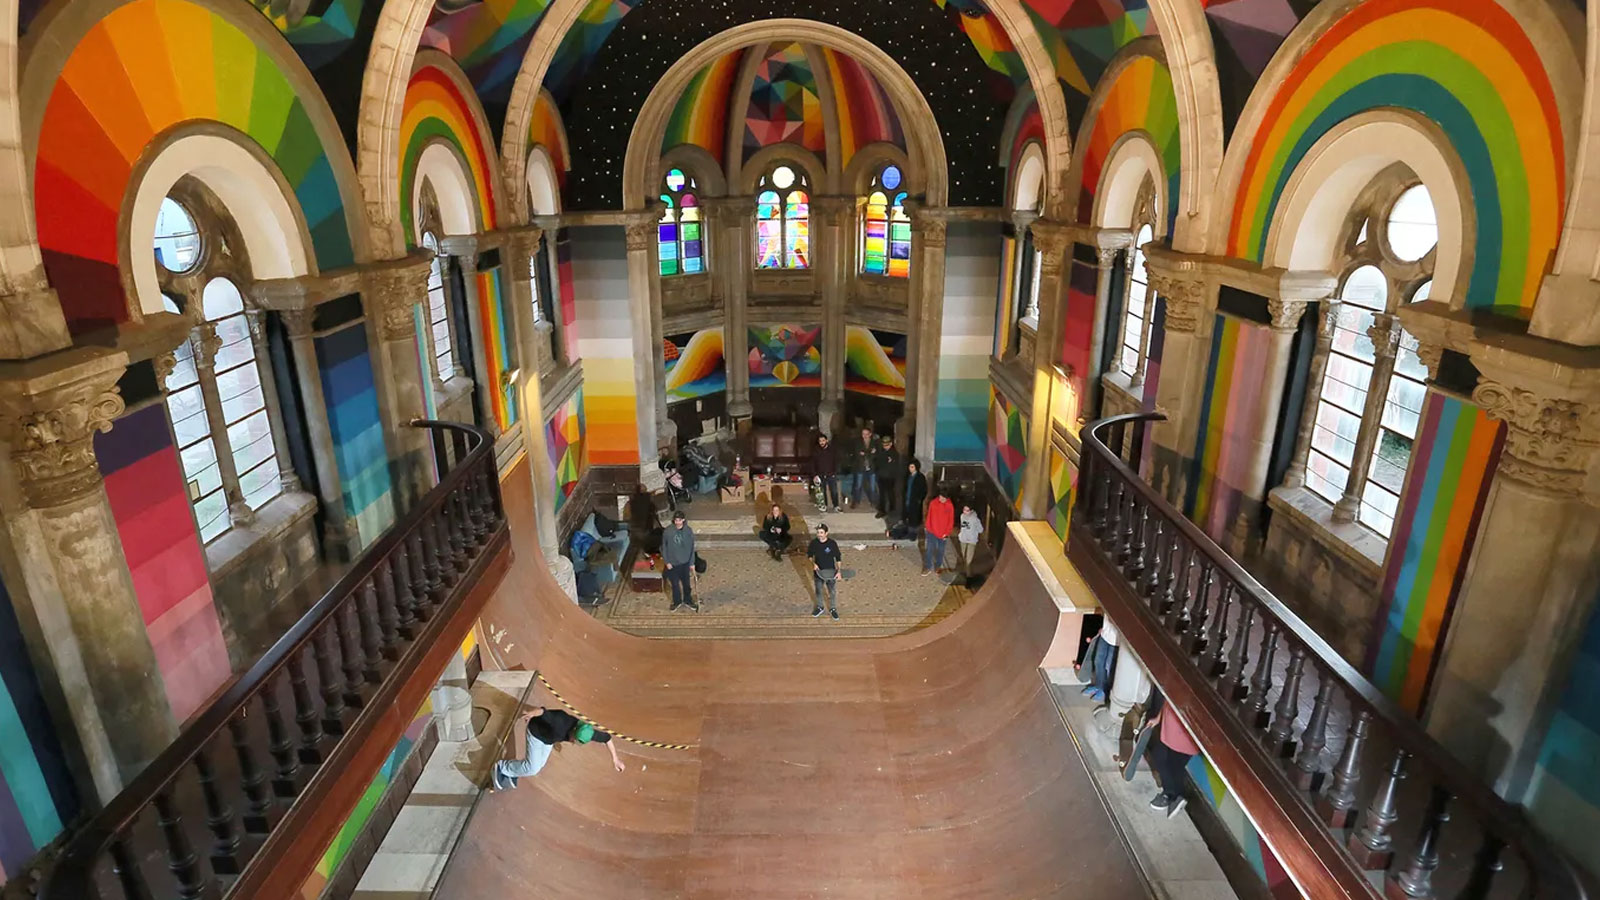 Upcycled: What passions are people now worshipping at these 10 former churches?